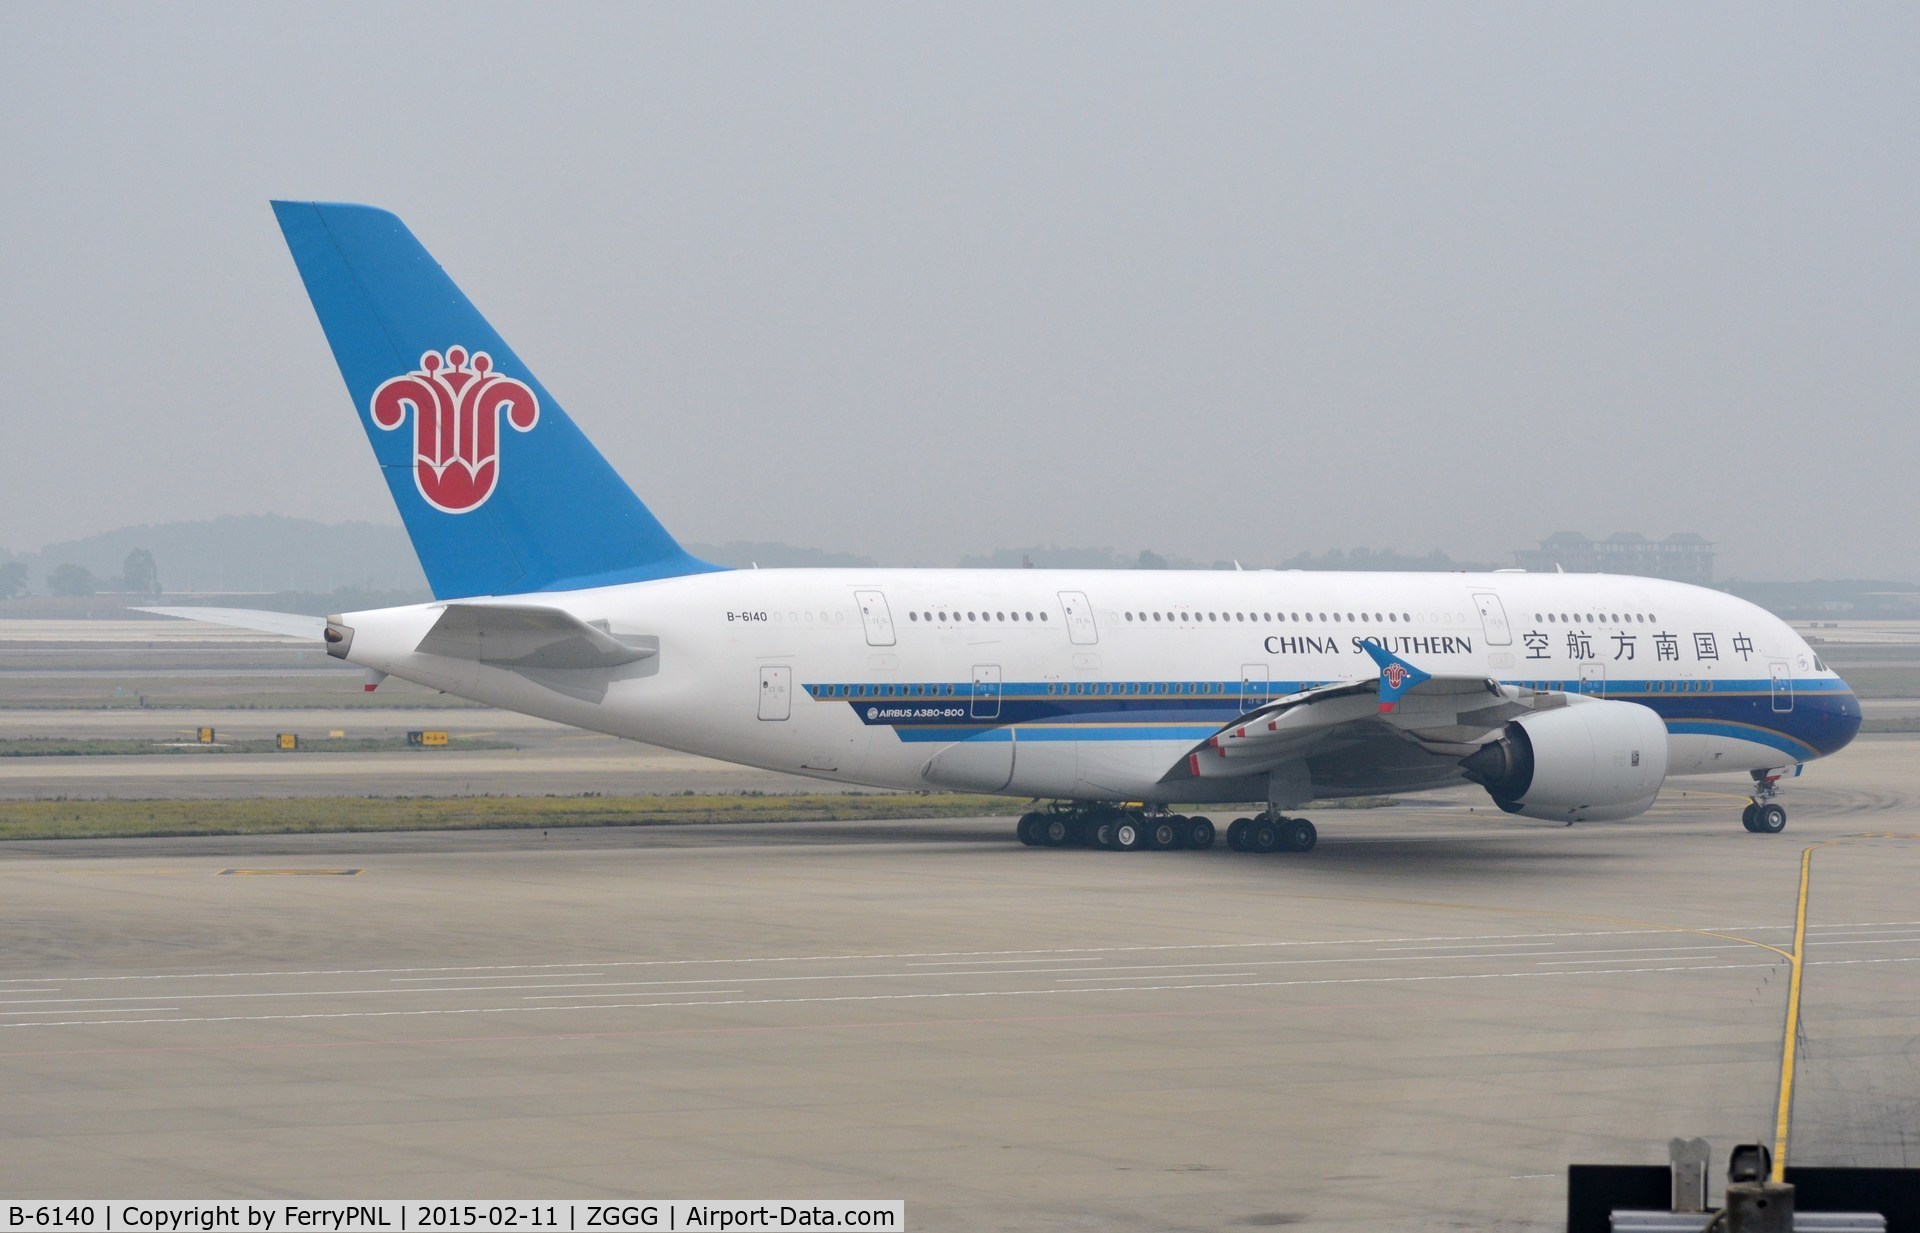 B-6140, 2012 Airbus A380-841 C/N 120, China Southern A388 about to depart for LAX